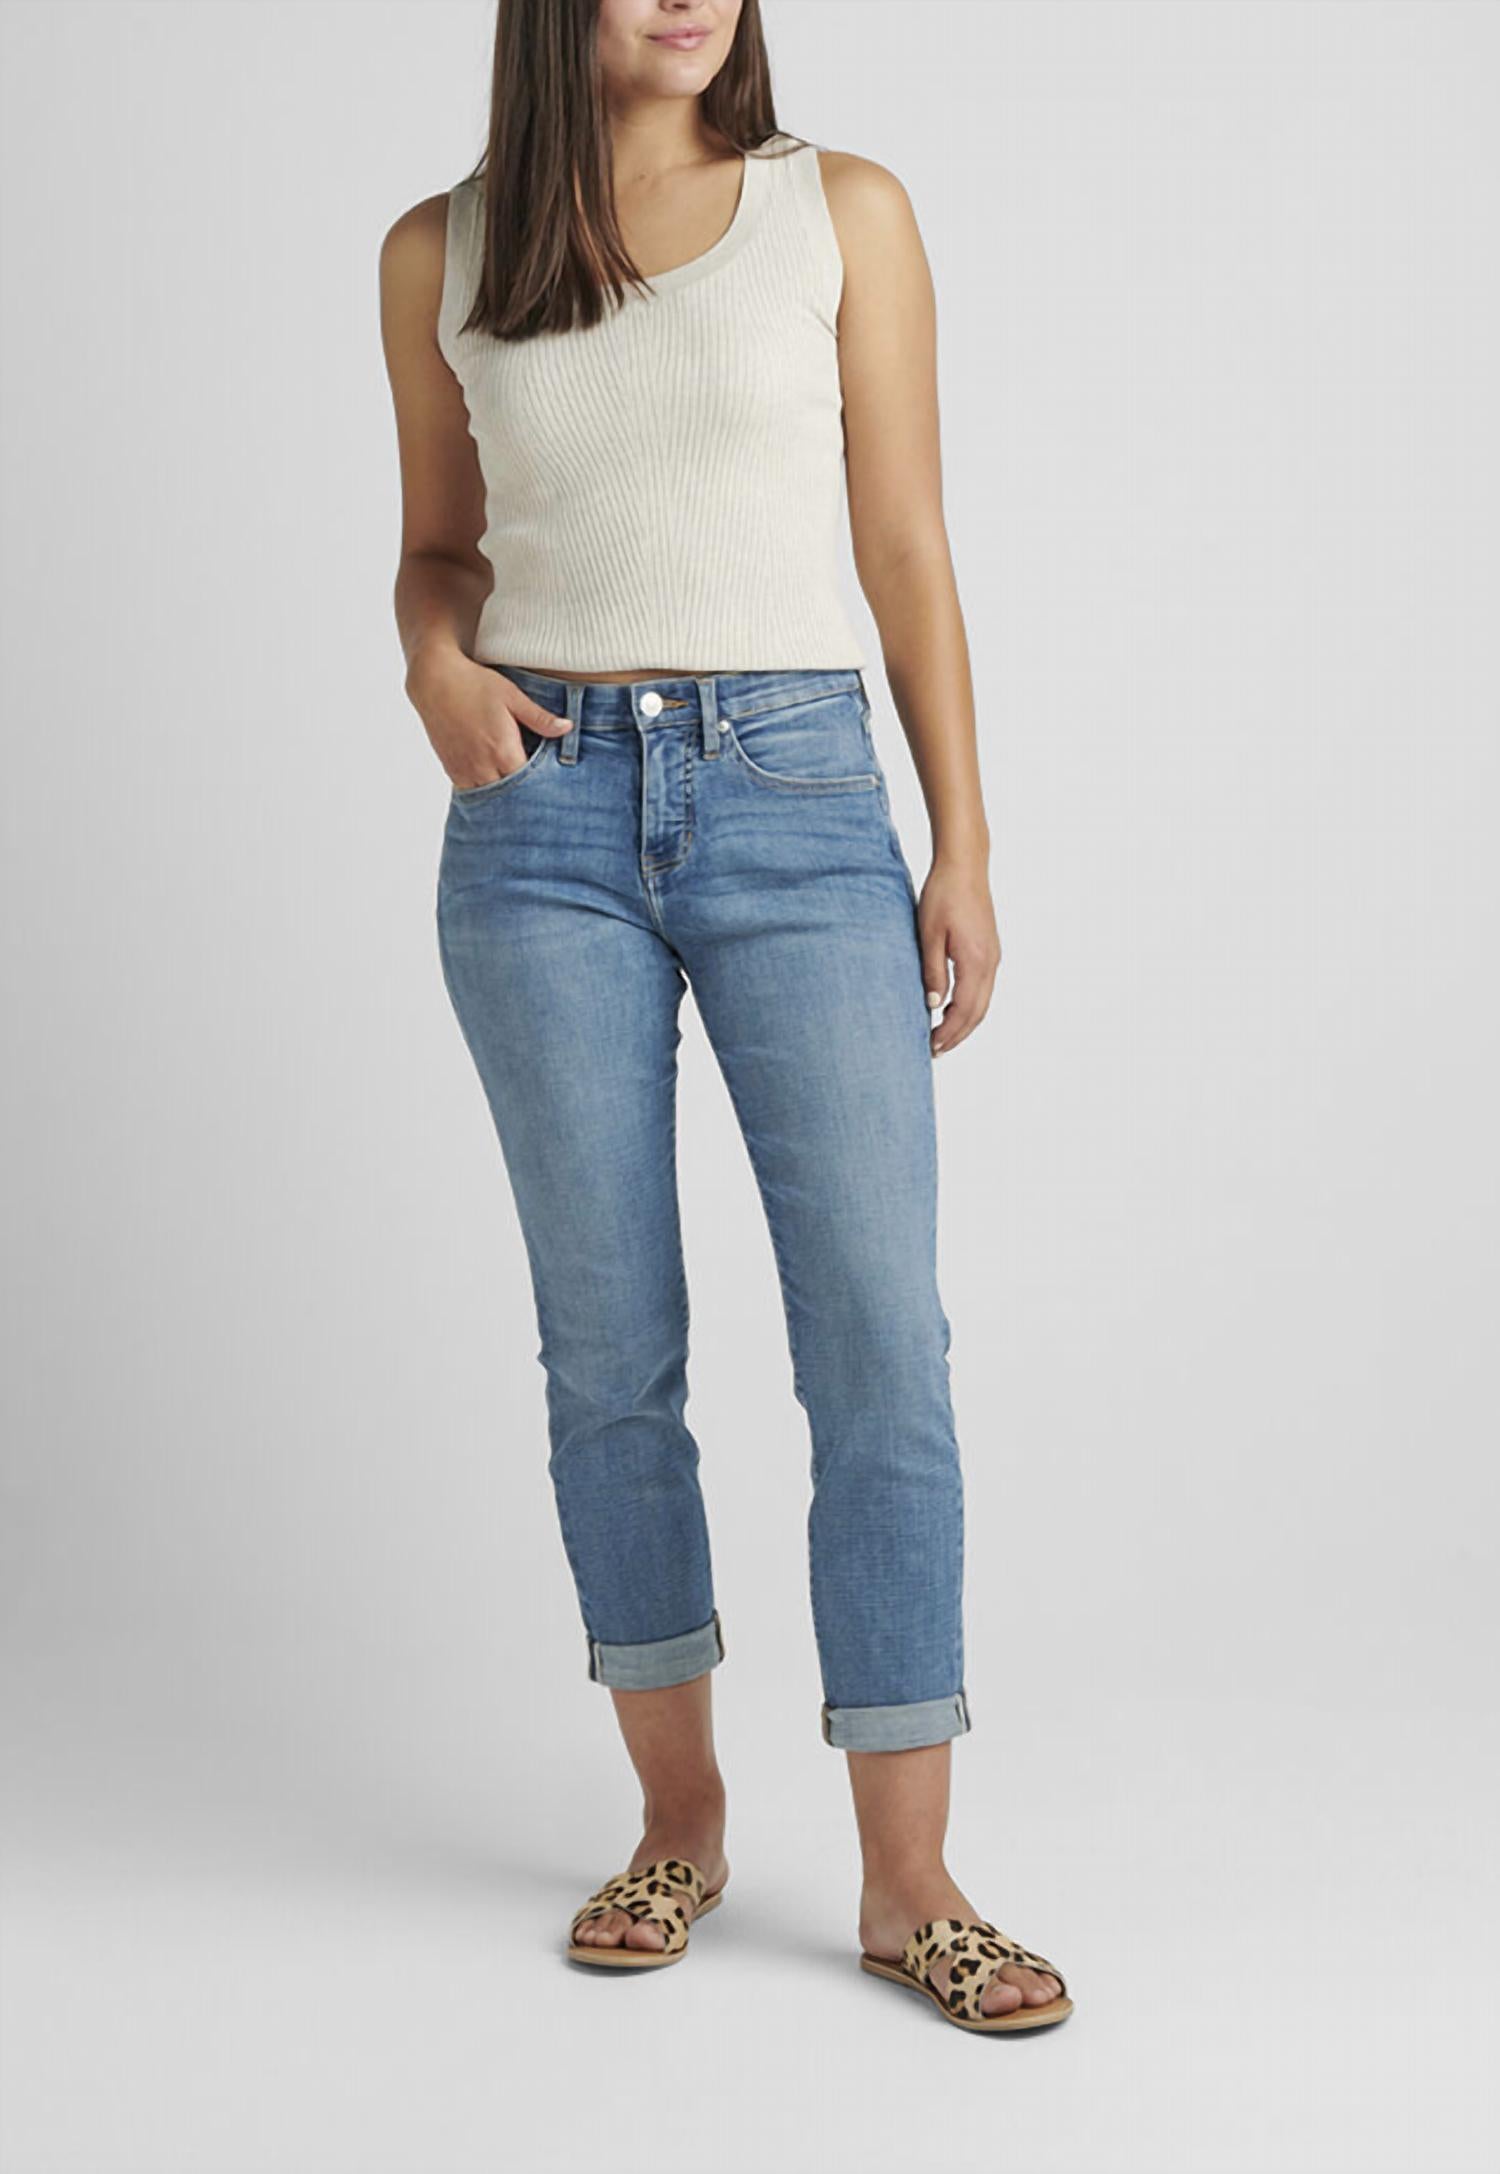 JAG Carter Mid Rise Girlfriend Jeans in Mid Vintage